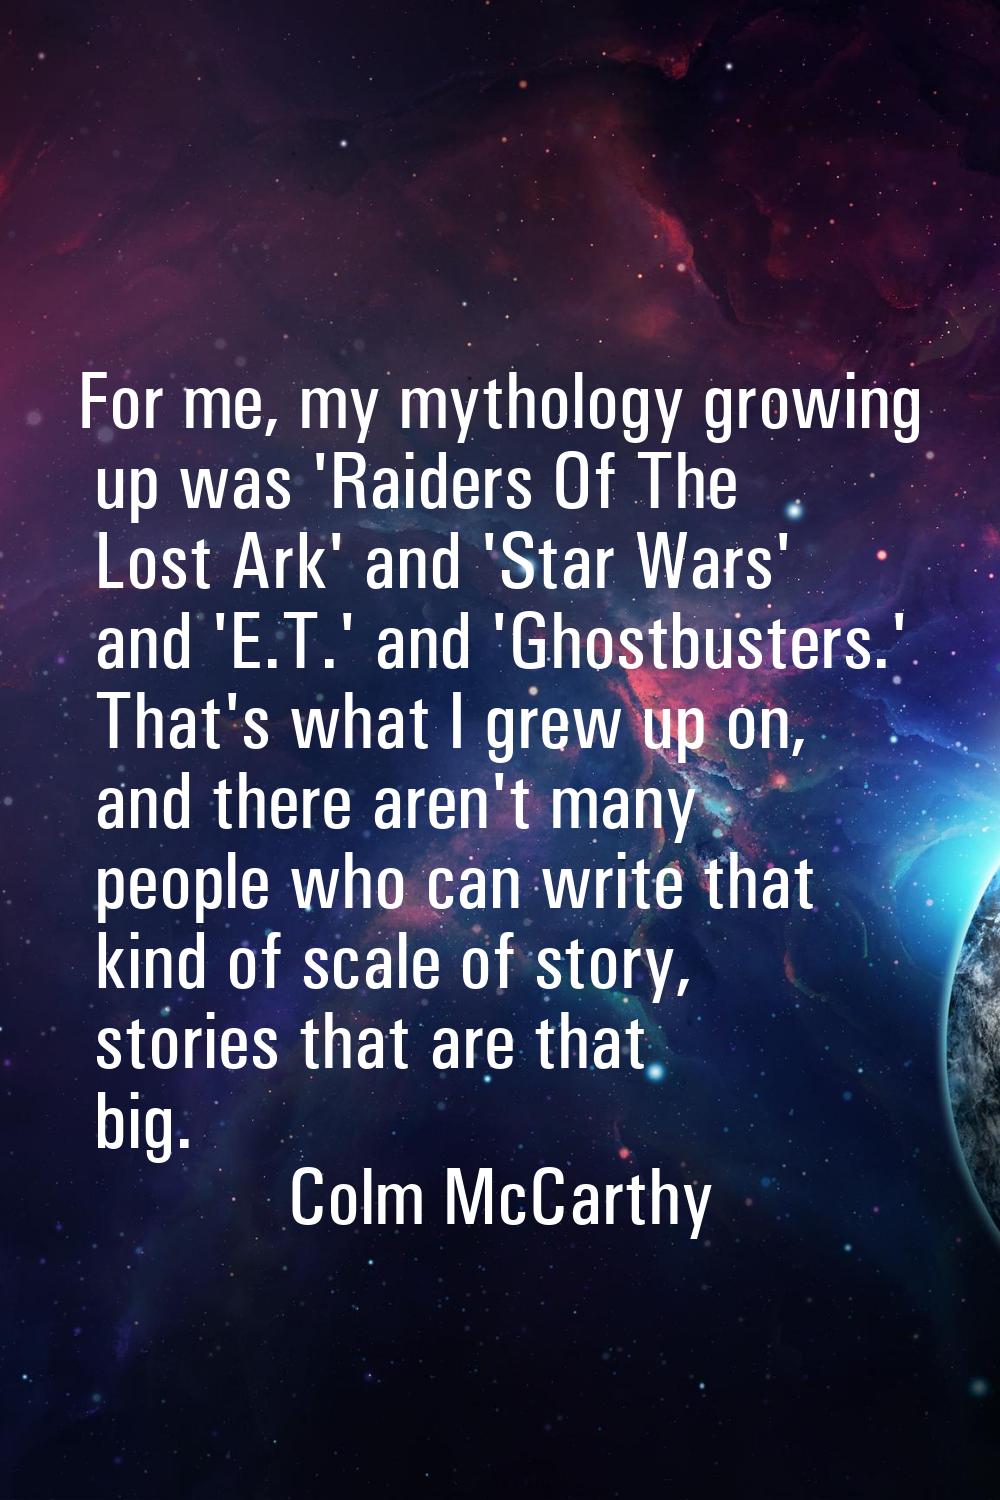 For me, my mythology growing up was 'Raiders Of The Lost Ark' and 'Star Wars' and 'E.T.' and 'Ghost